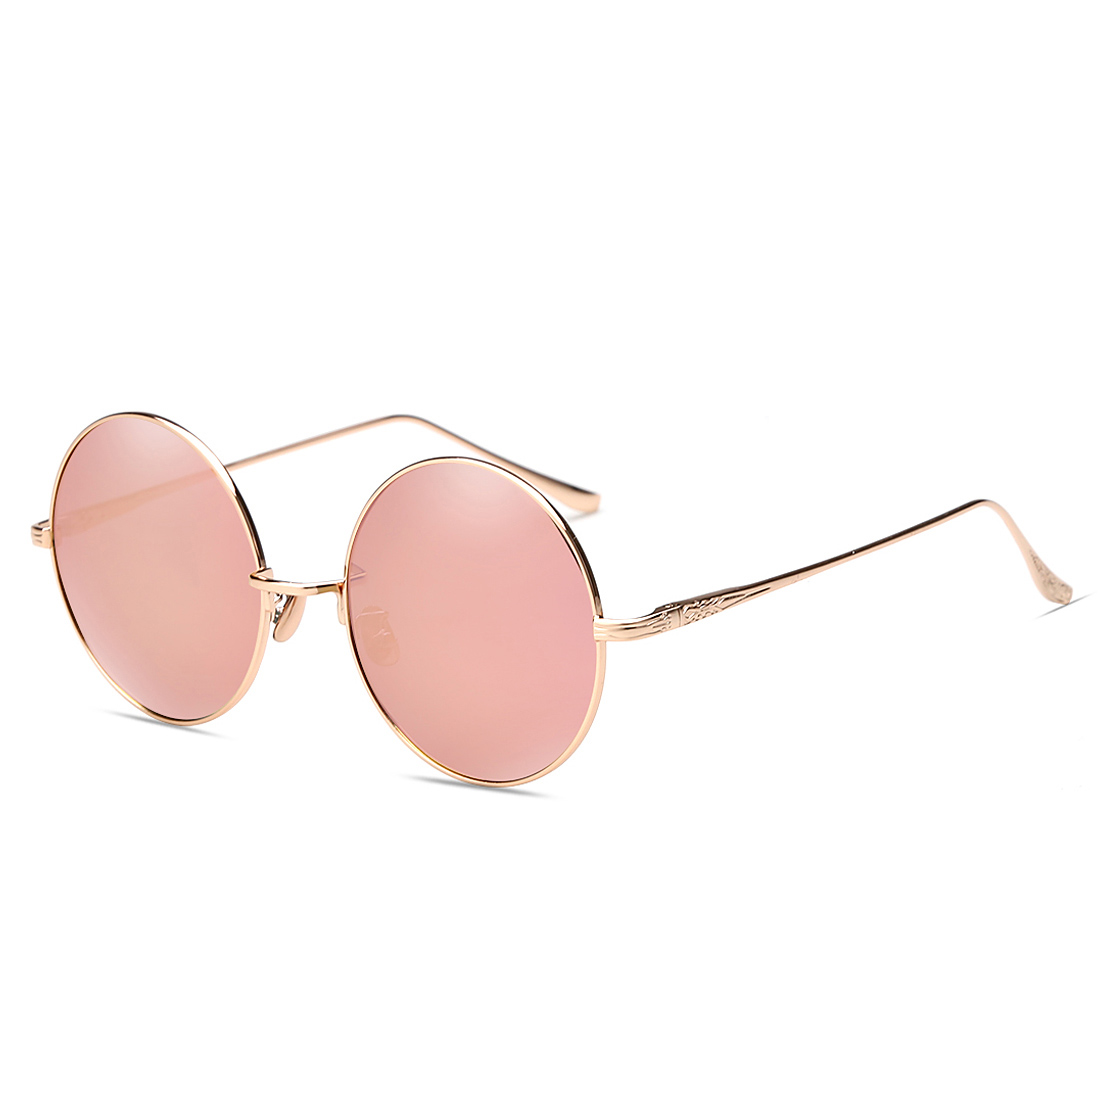 Kính mắt unisex Ful vue Mirrored Awesa